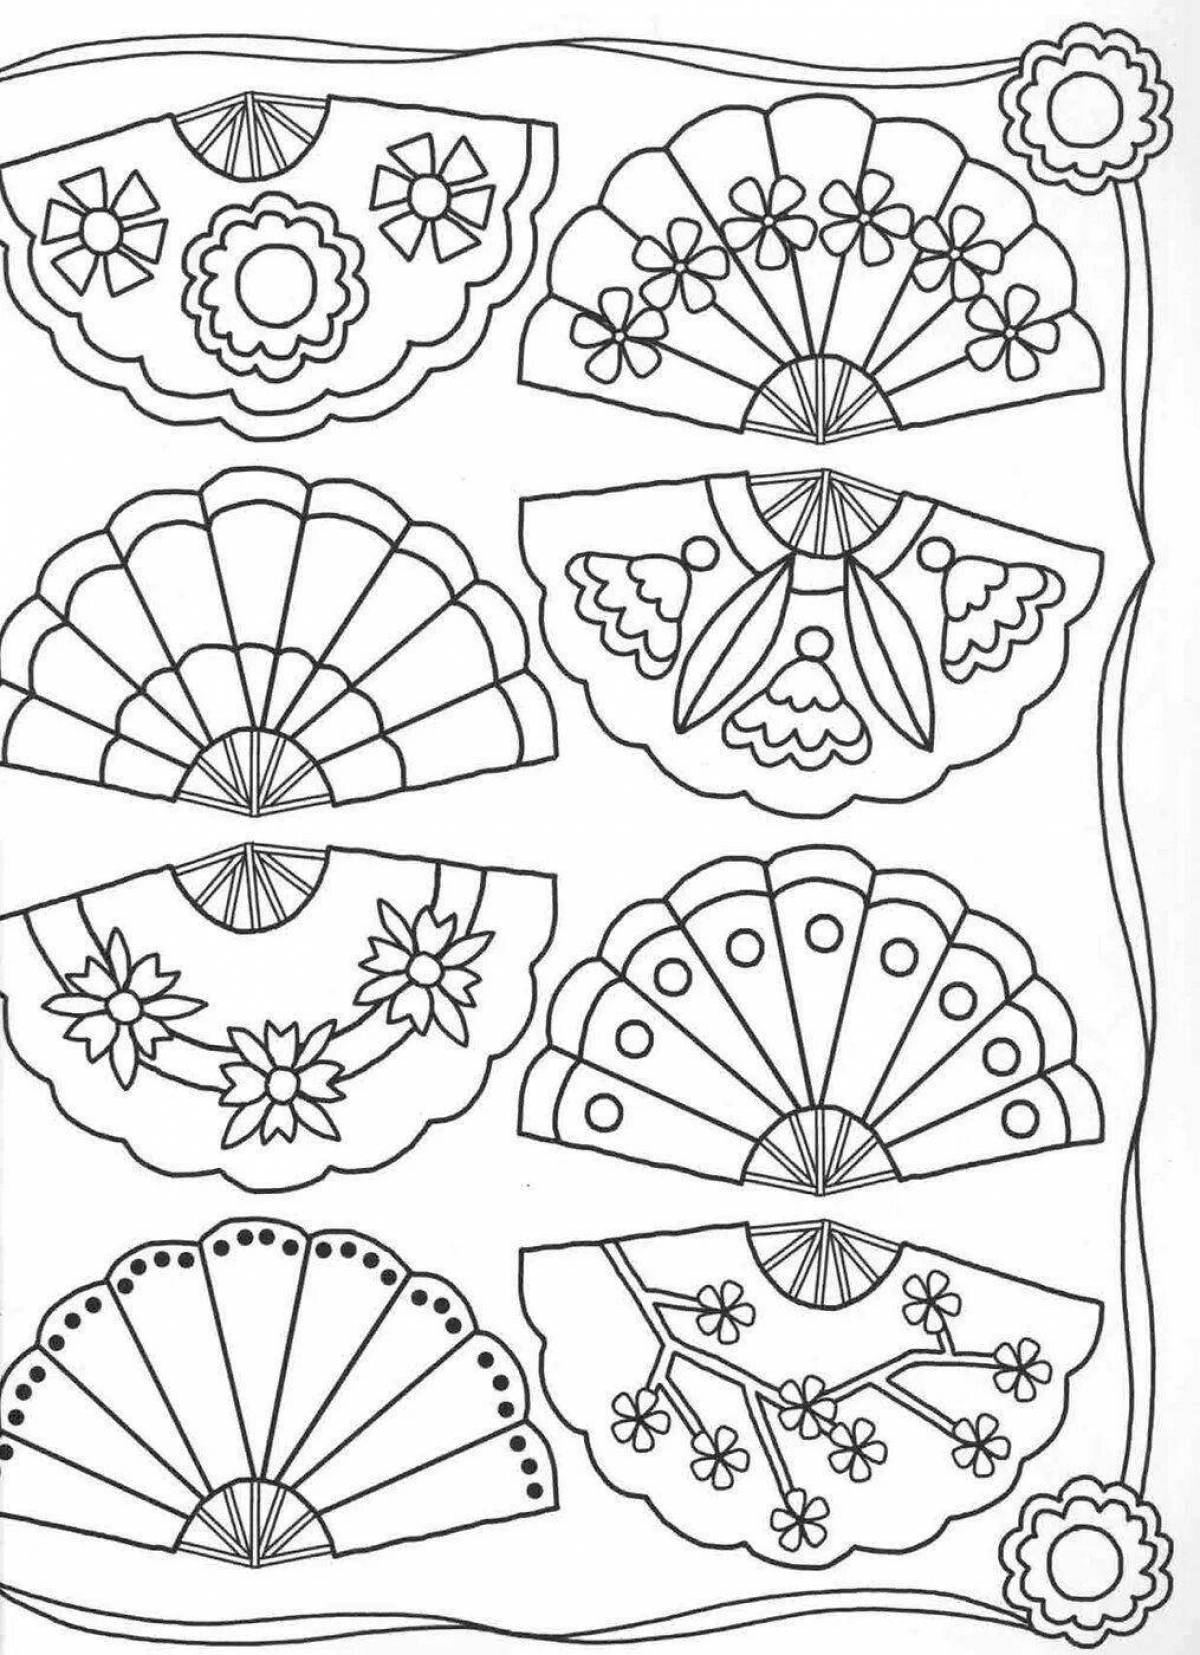 Japanese fan's mesmerizing coloring book